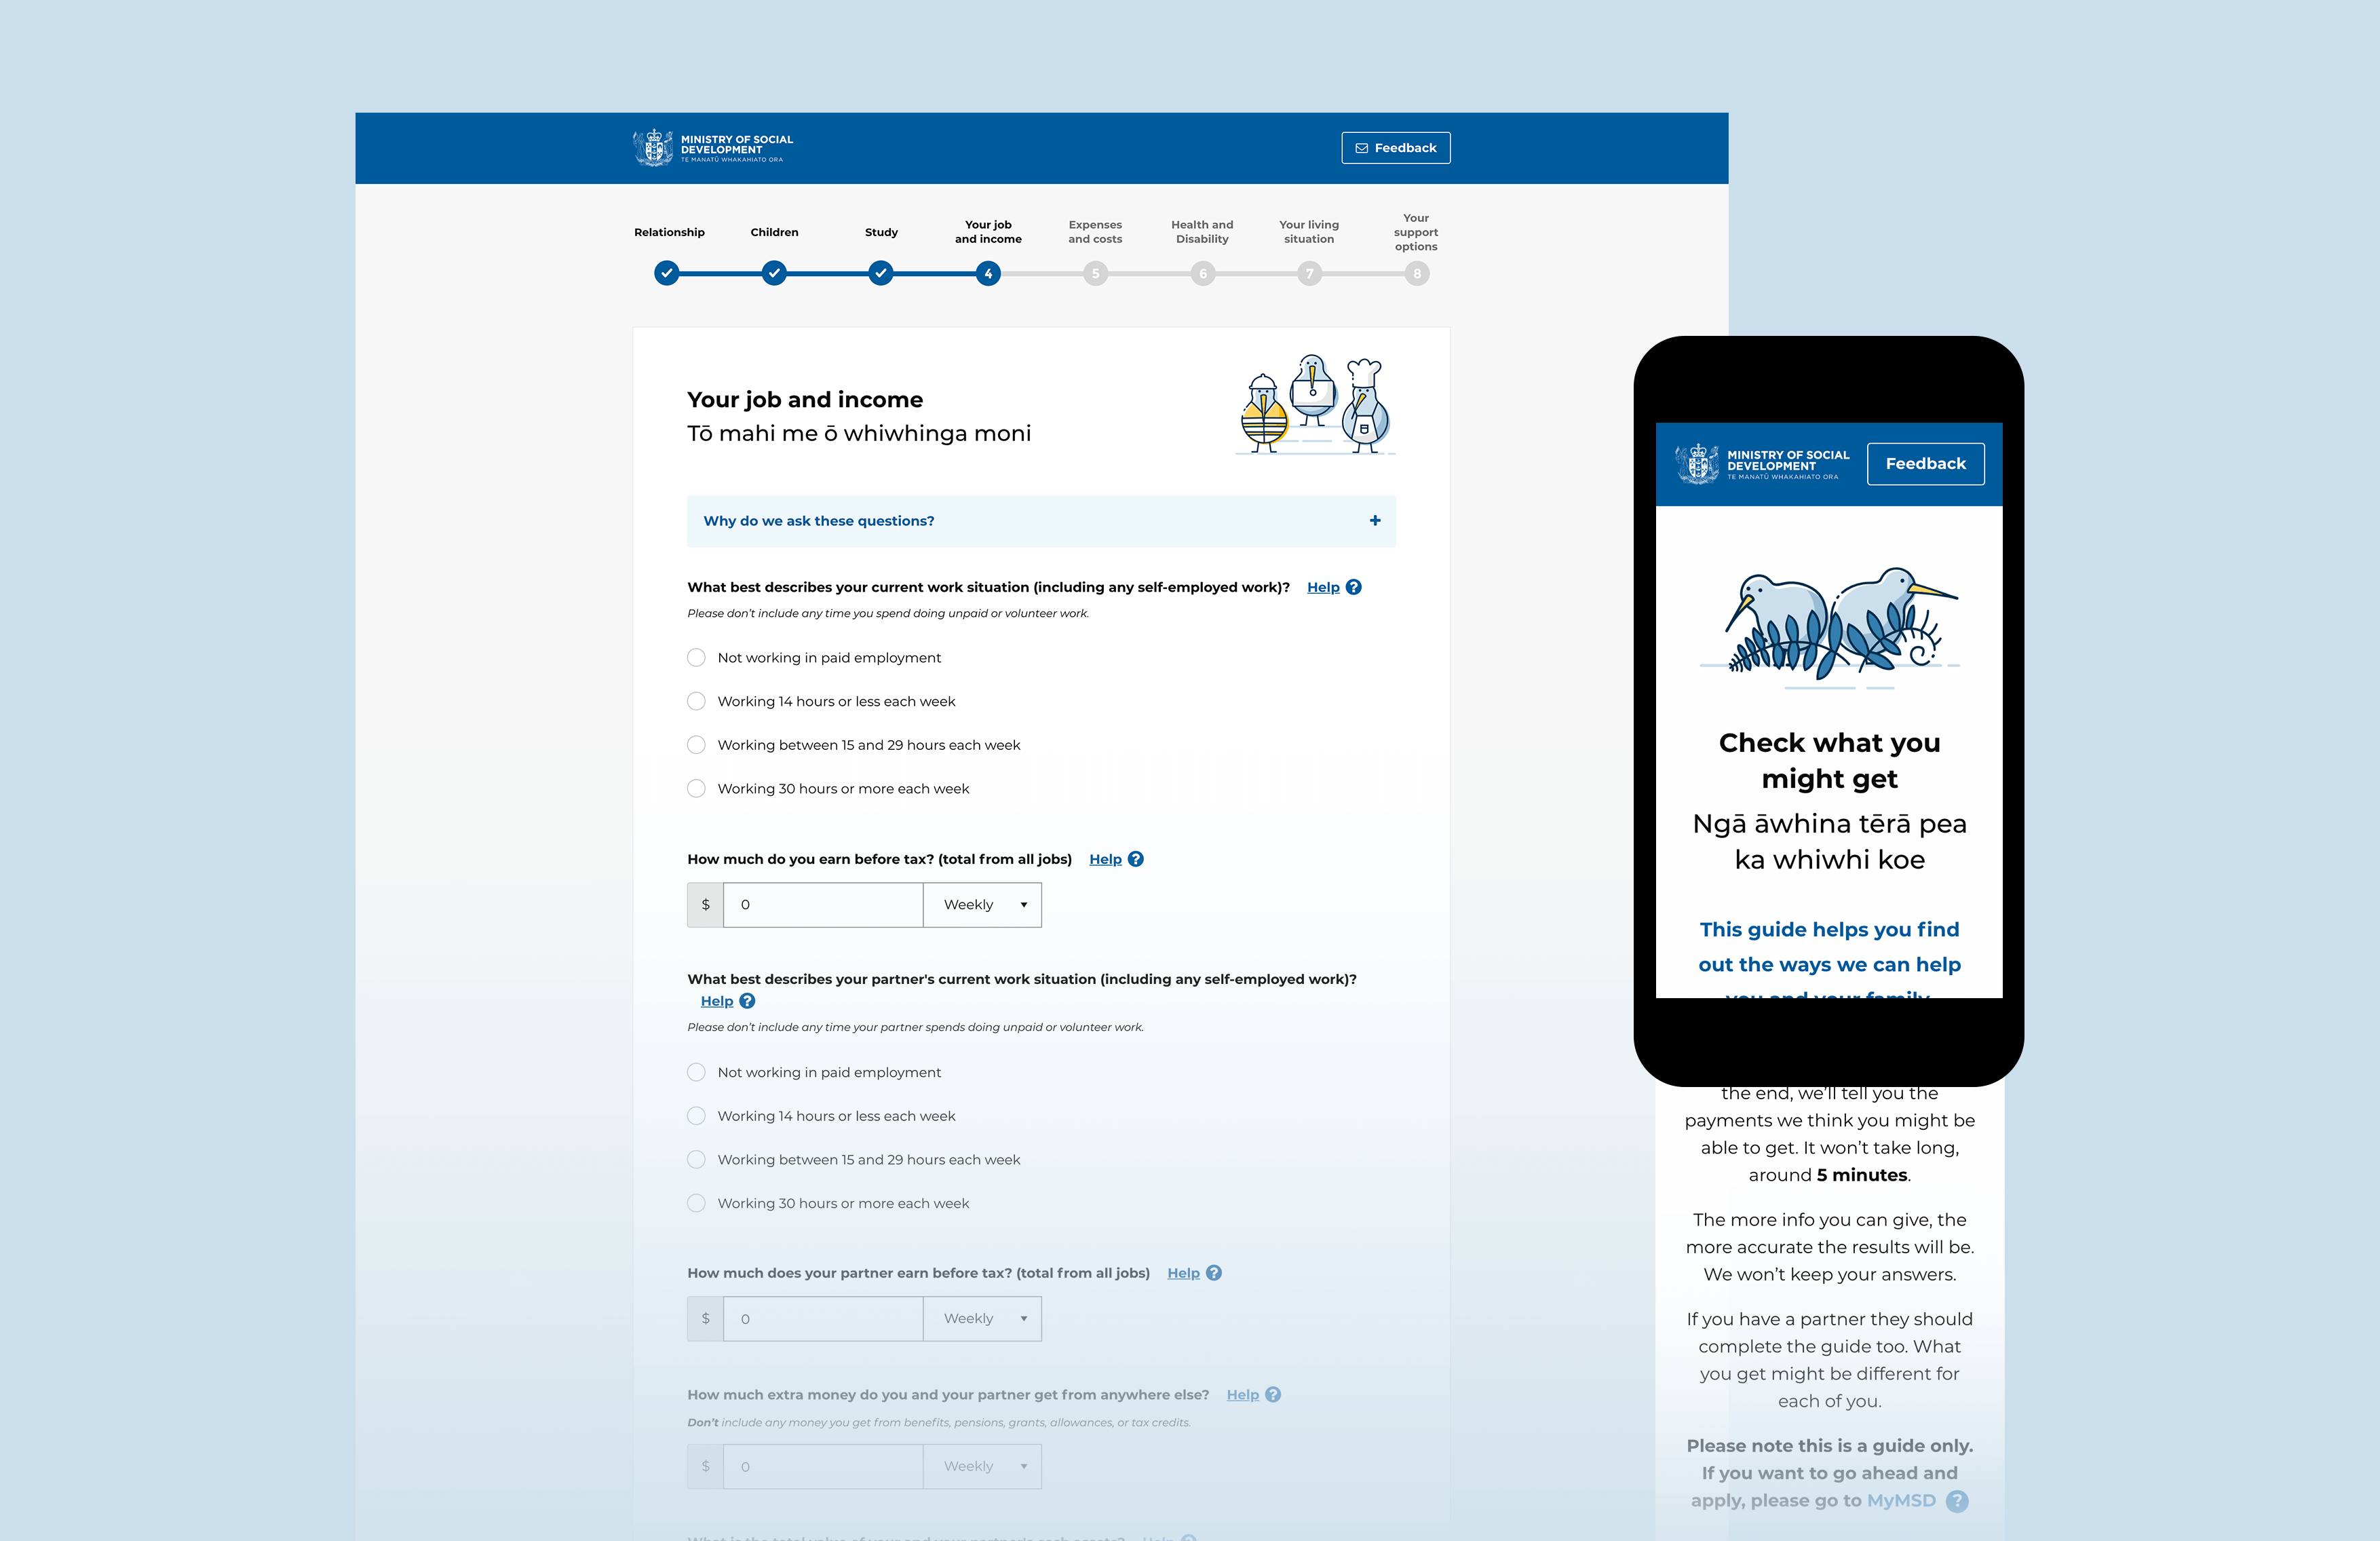 A mockup comparing "Check what you might get" on a desktop and on a mobile.